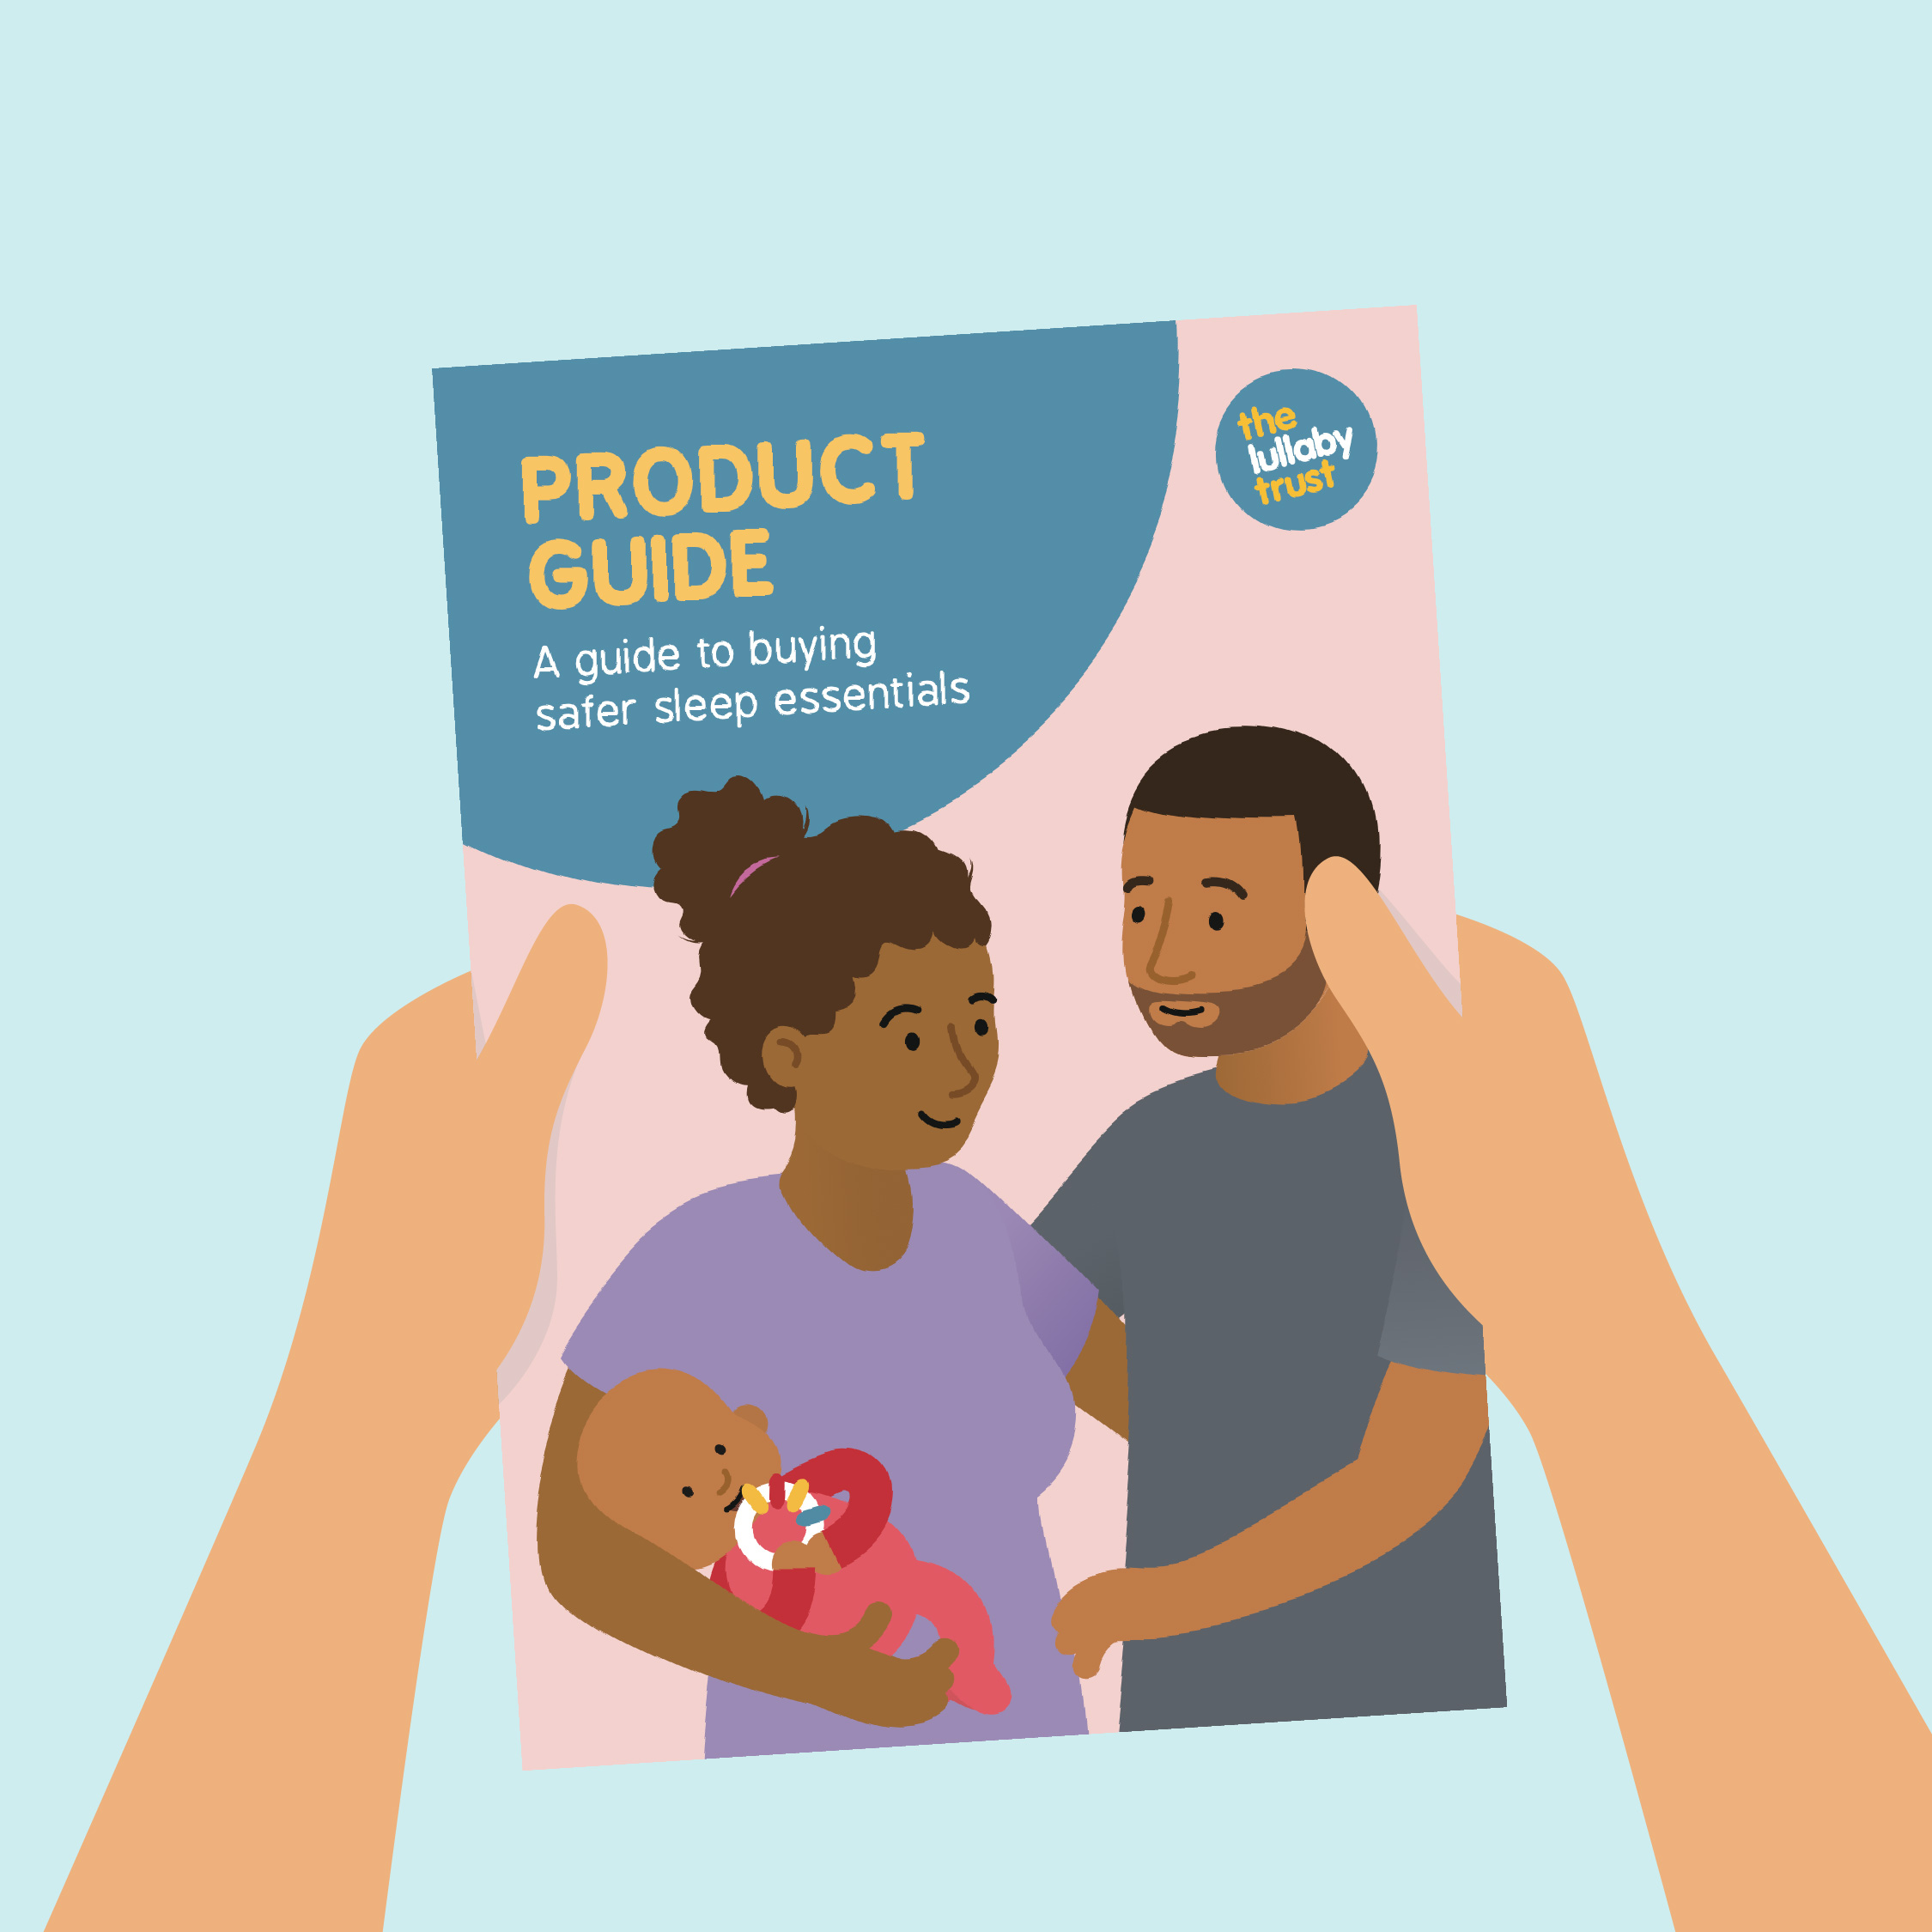 Safer sleep for babies resources - product guide